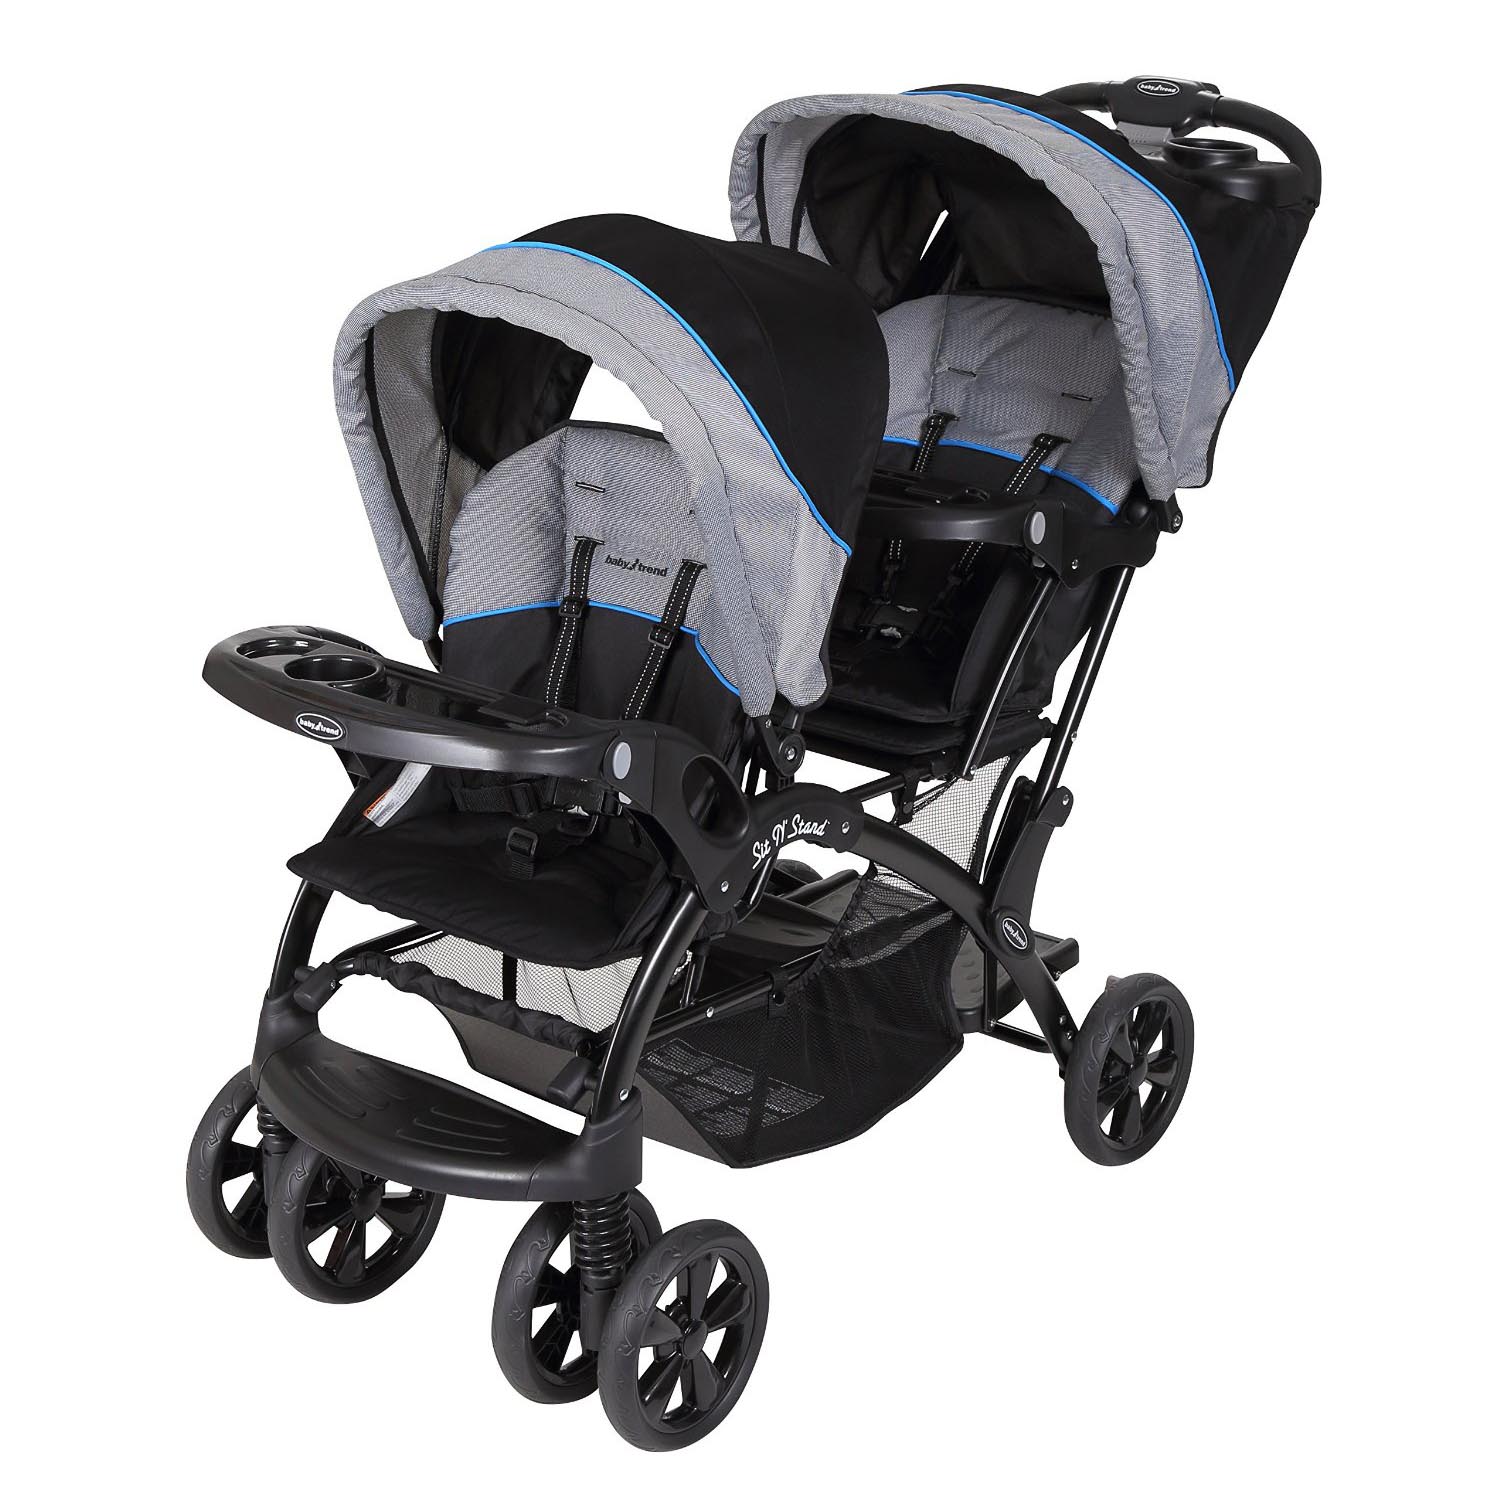 Baby Trend Sit N Stand Double Stroller, Millennium Blue - image 1 of 6